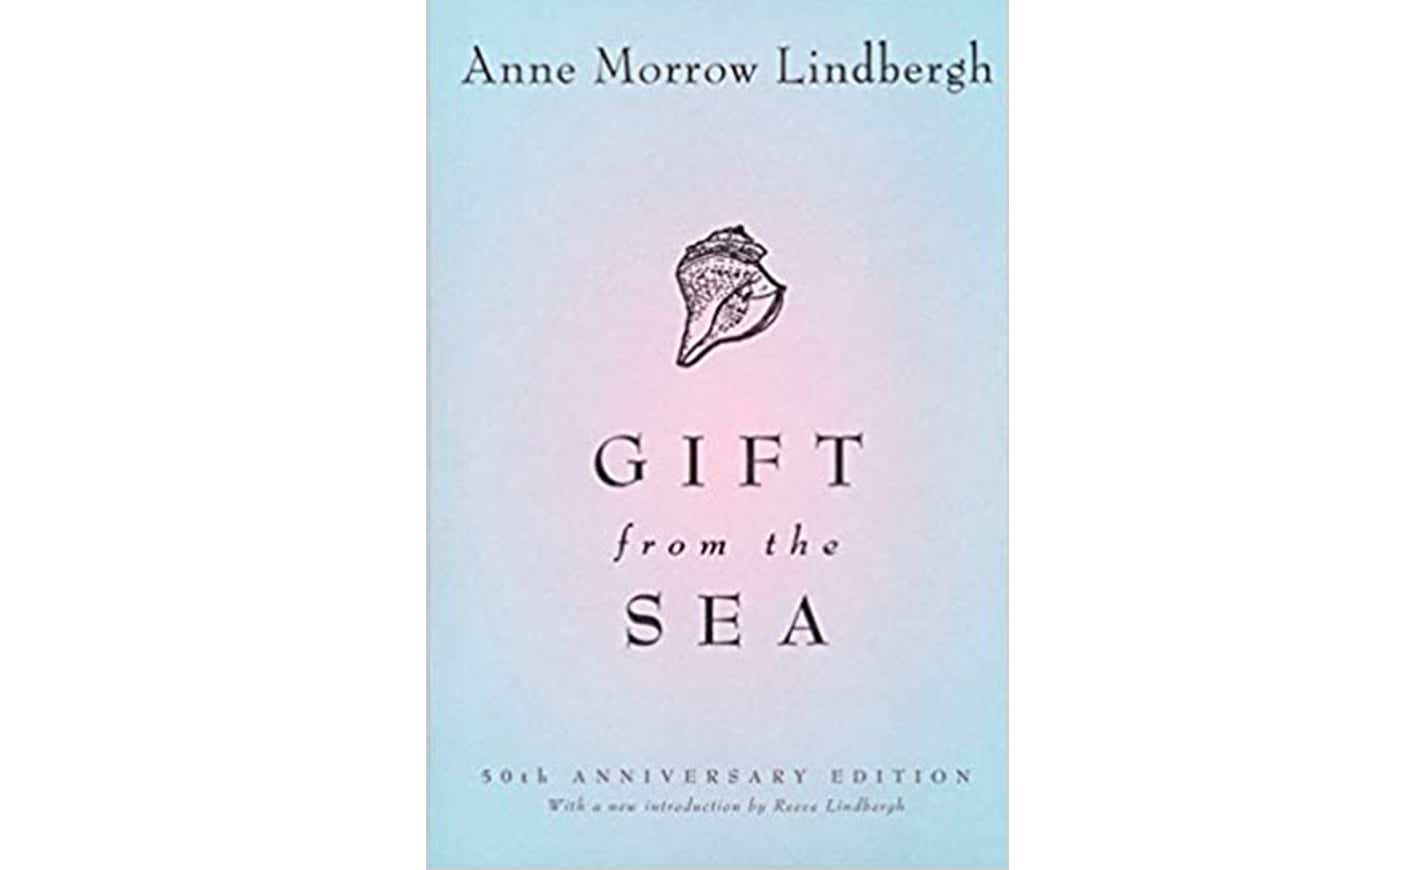 Gift from the sea by Anne Morrow